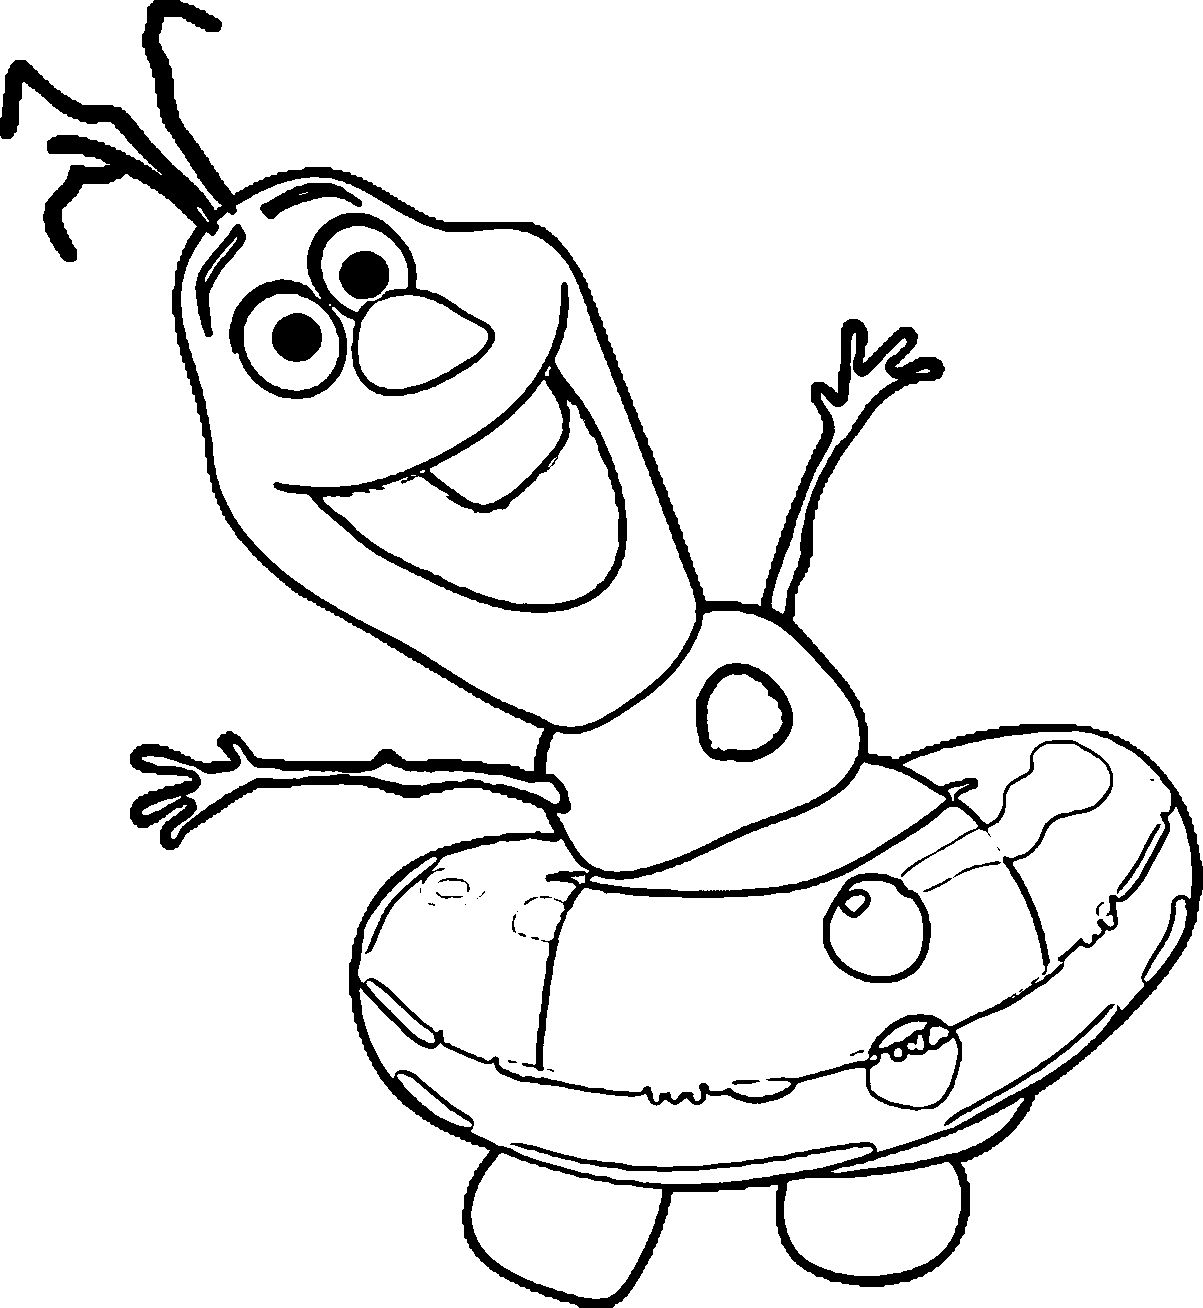 Olaf Coloring Pages TV Film Summer Olaf Printable 2020 05652 Coloring4free